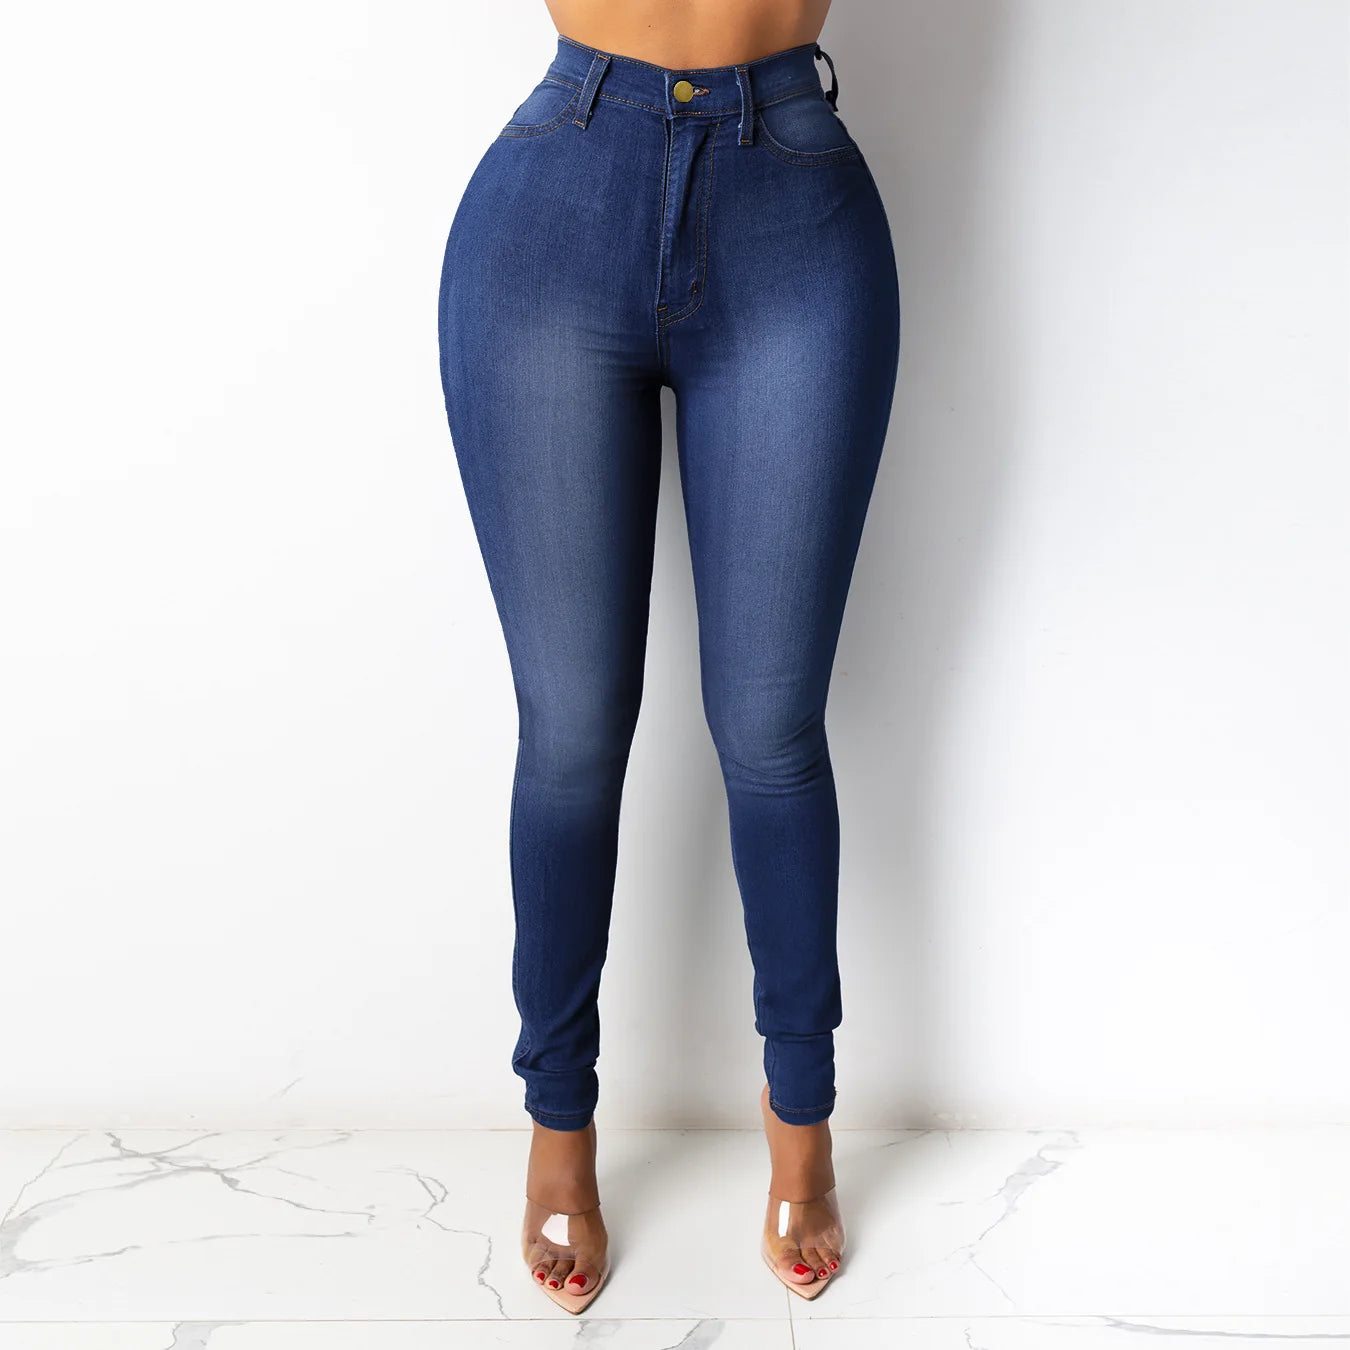 2022 Spring New 5 Colors High Waist Thin Jeans For Women Fashion Casual Slim Elastic Denim Pencil Pants S-3XL Drop Shipping 